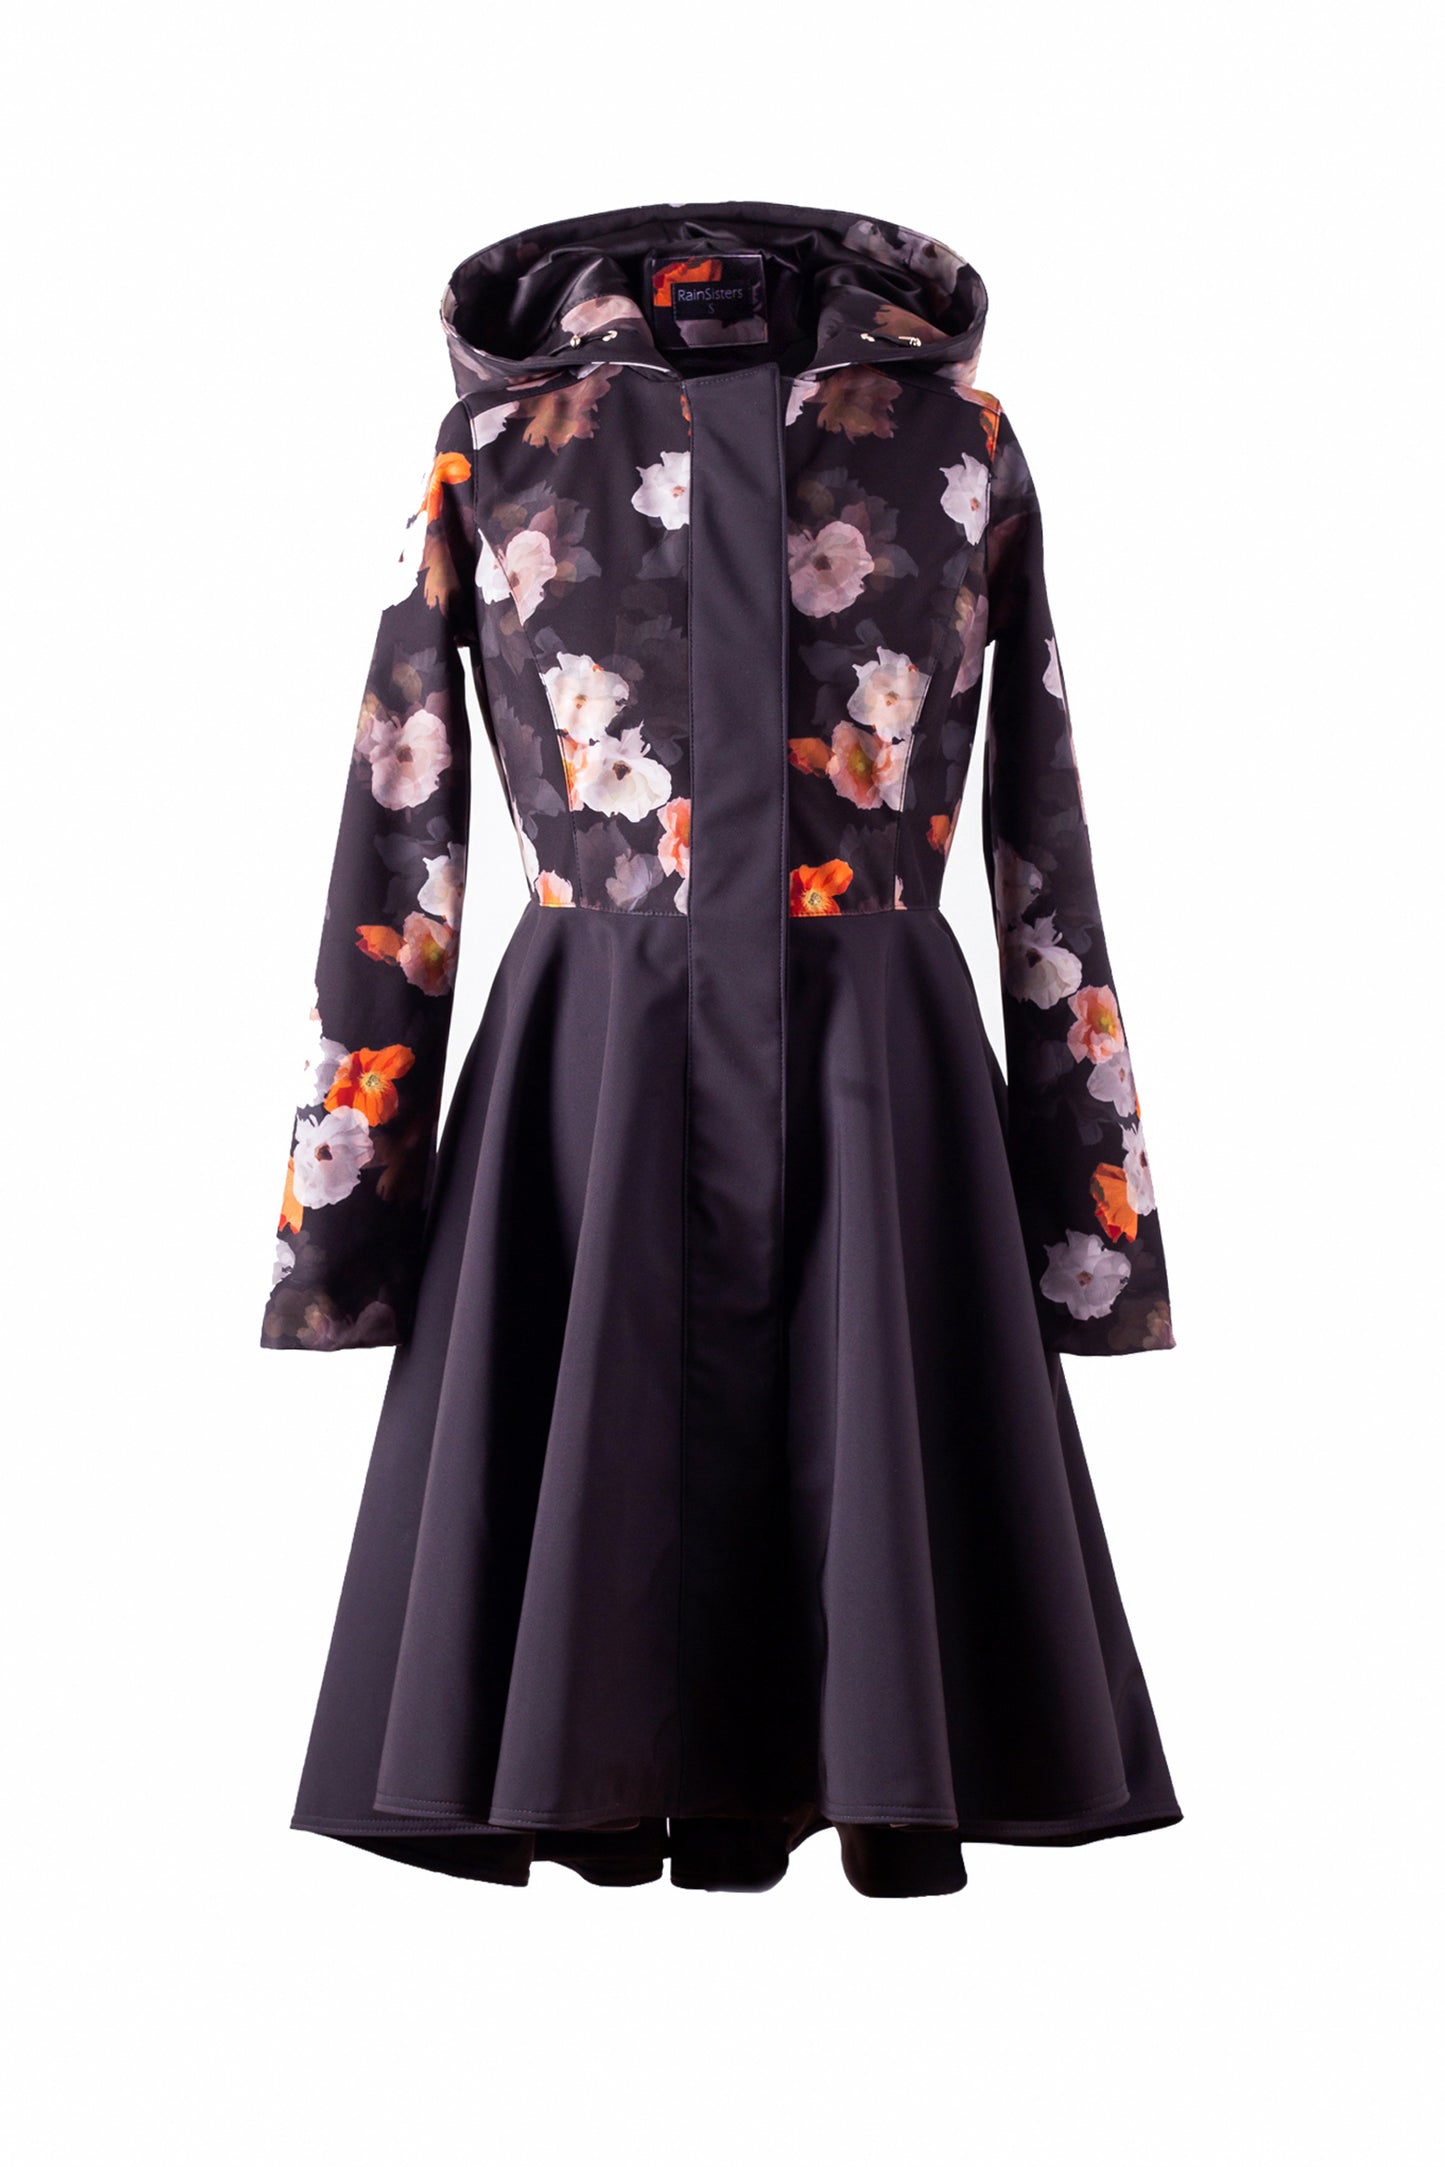 Black Flared Coat with high-low hemline and floral print on top part